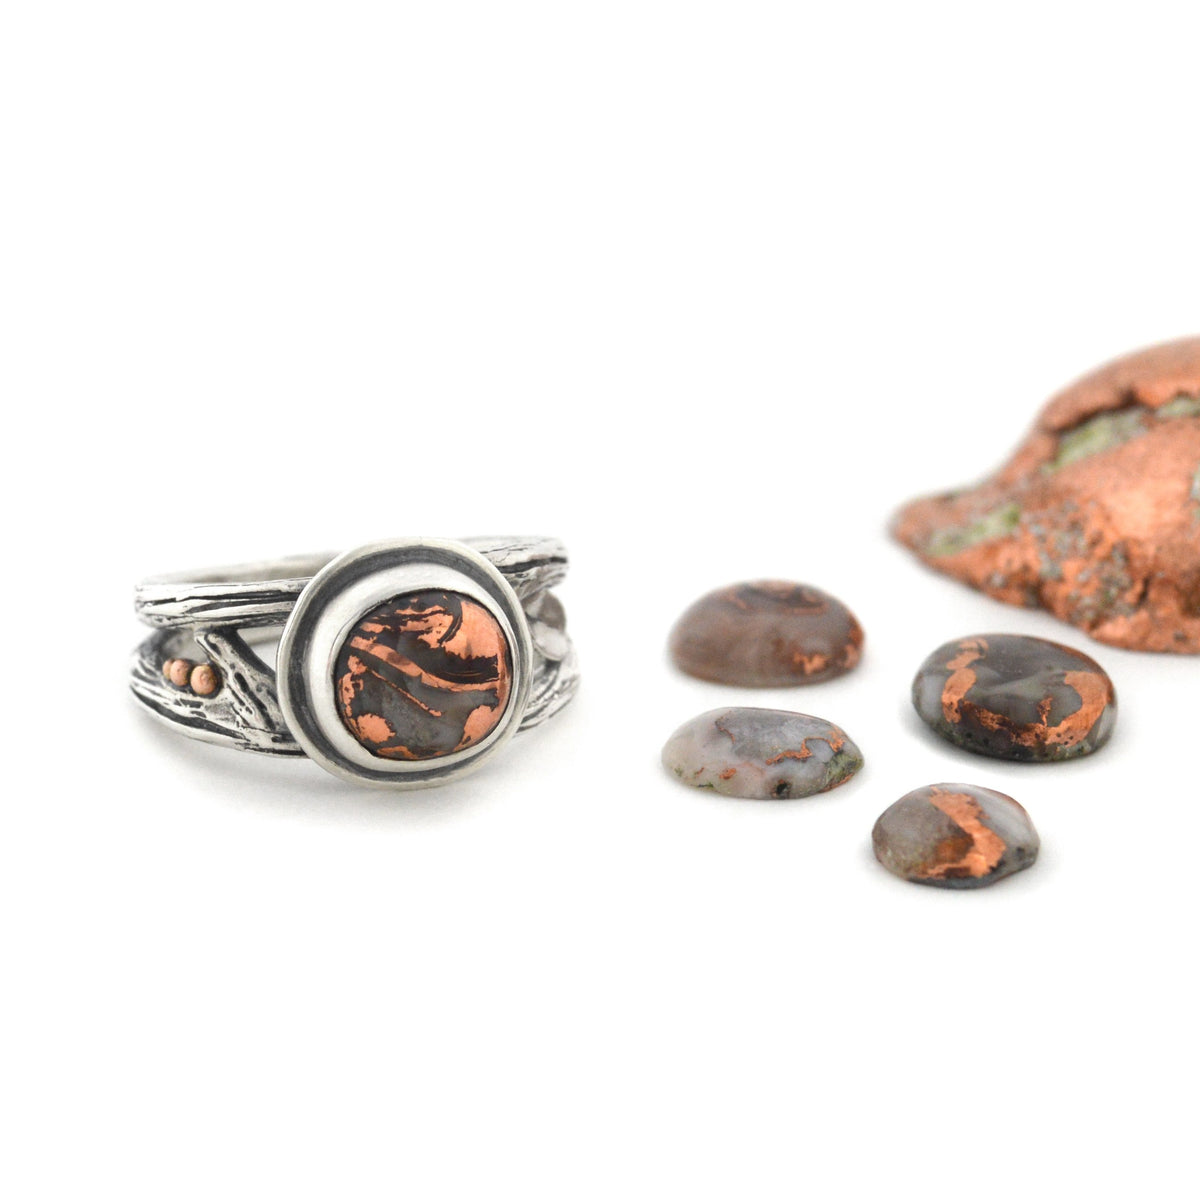 Copper Agate Autumn Twig Ring - Choose Your Own Stone - Ring A. 9mm / Lake Superior Copper Agate B. 8mm / Lake Superior Copper Agate 3721 - handmade by Beth Millner Jewelry